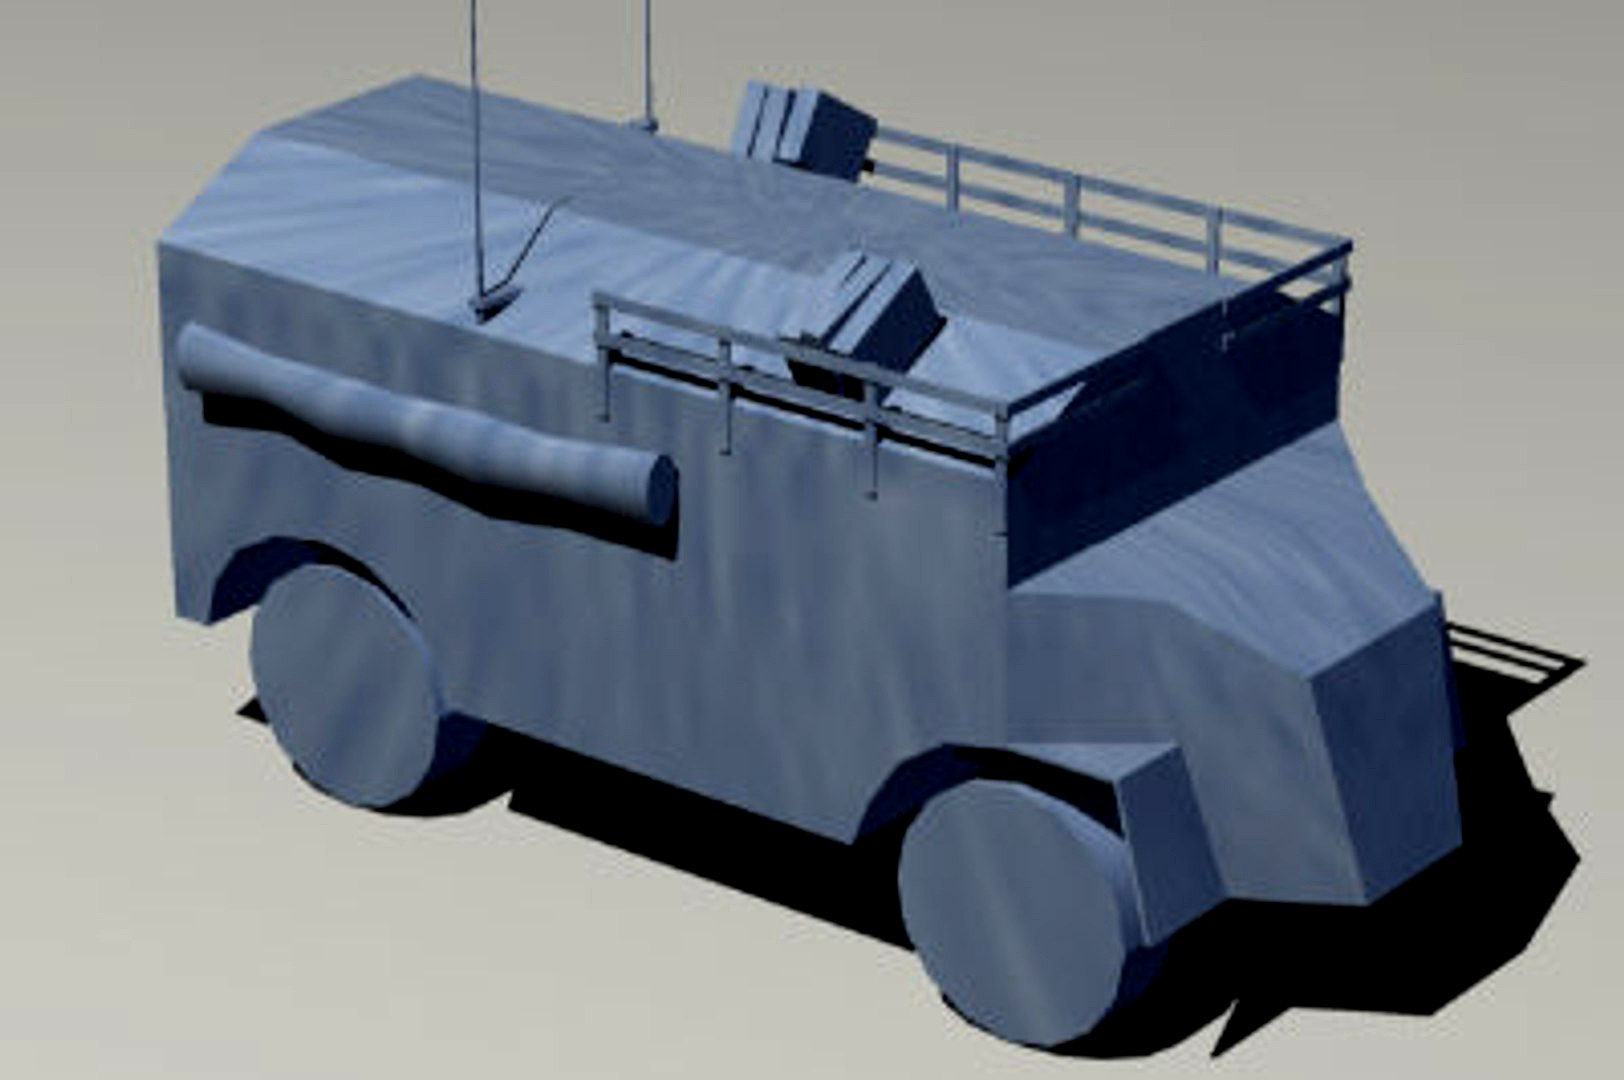 Dorchester Armoured Command Vehicle